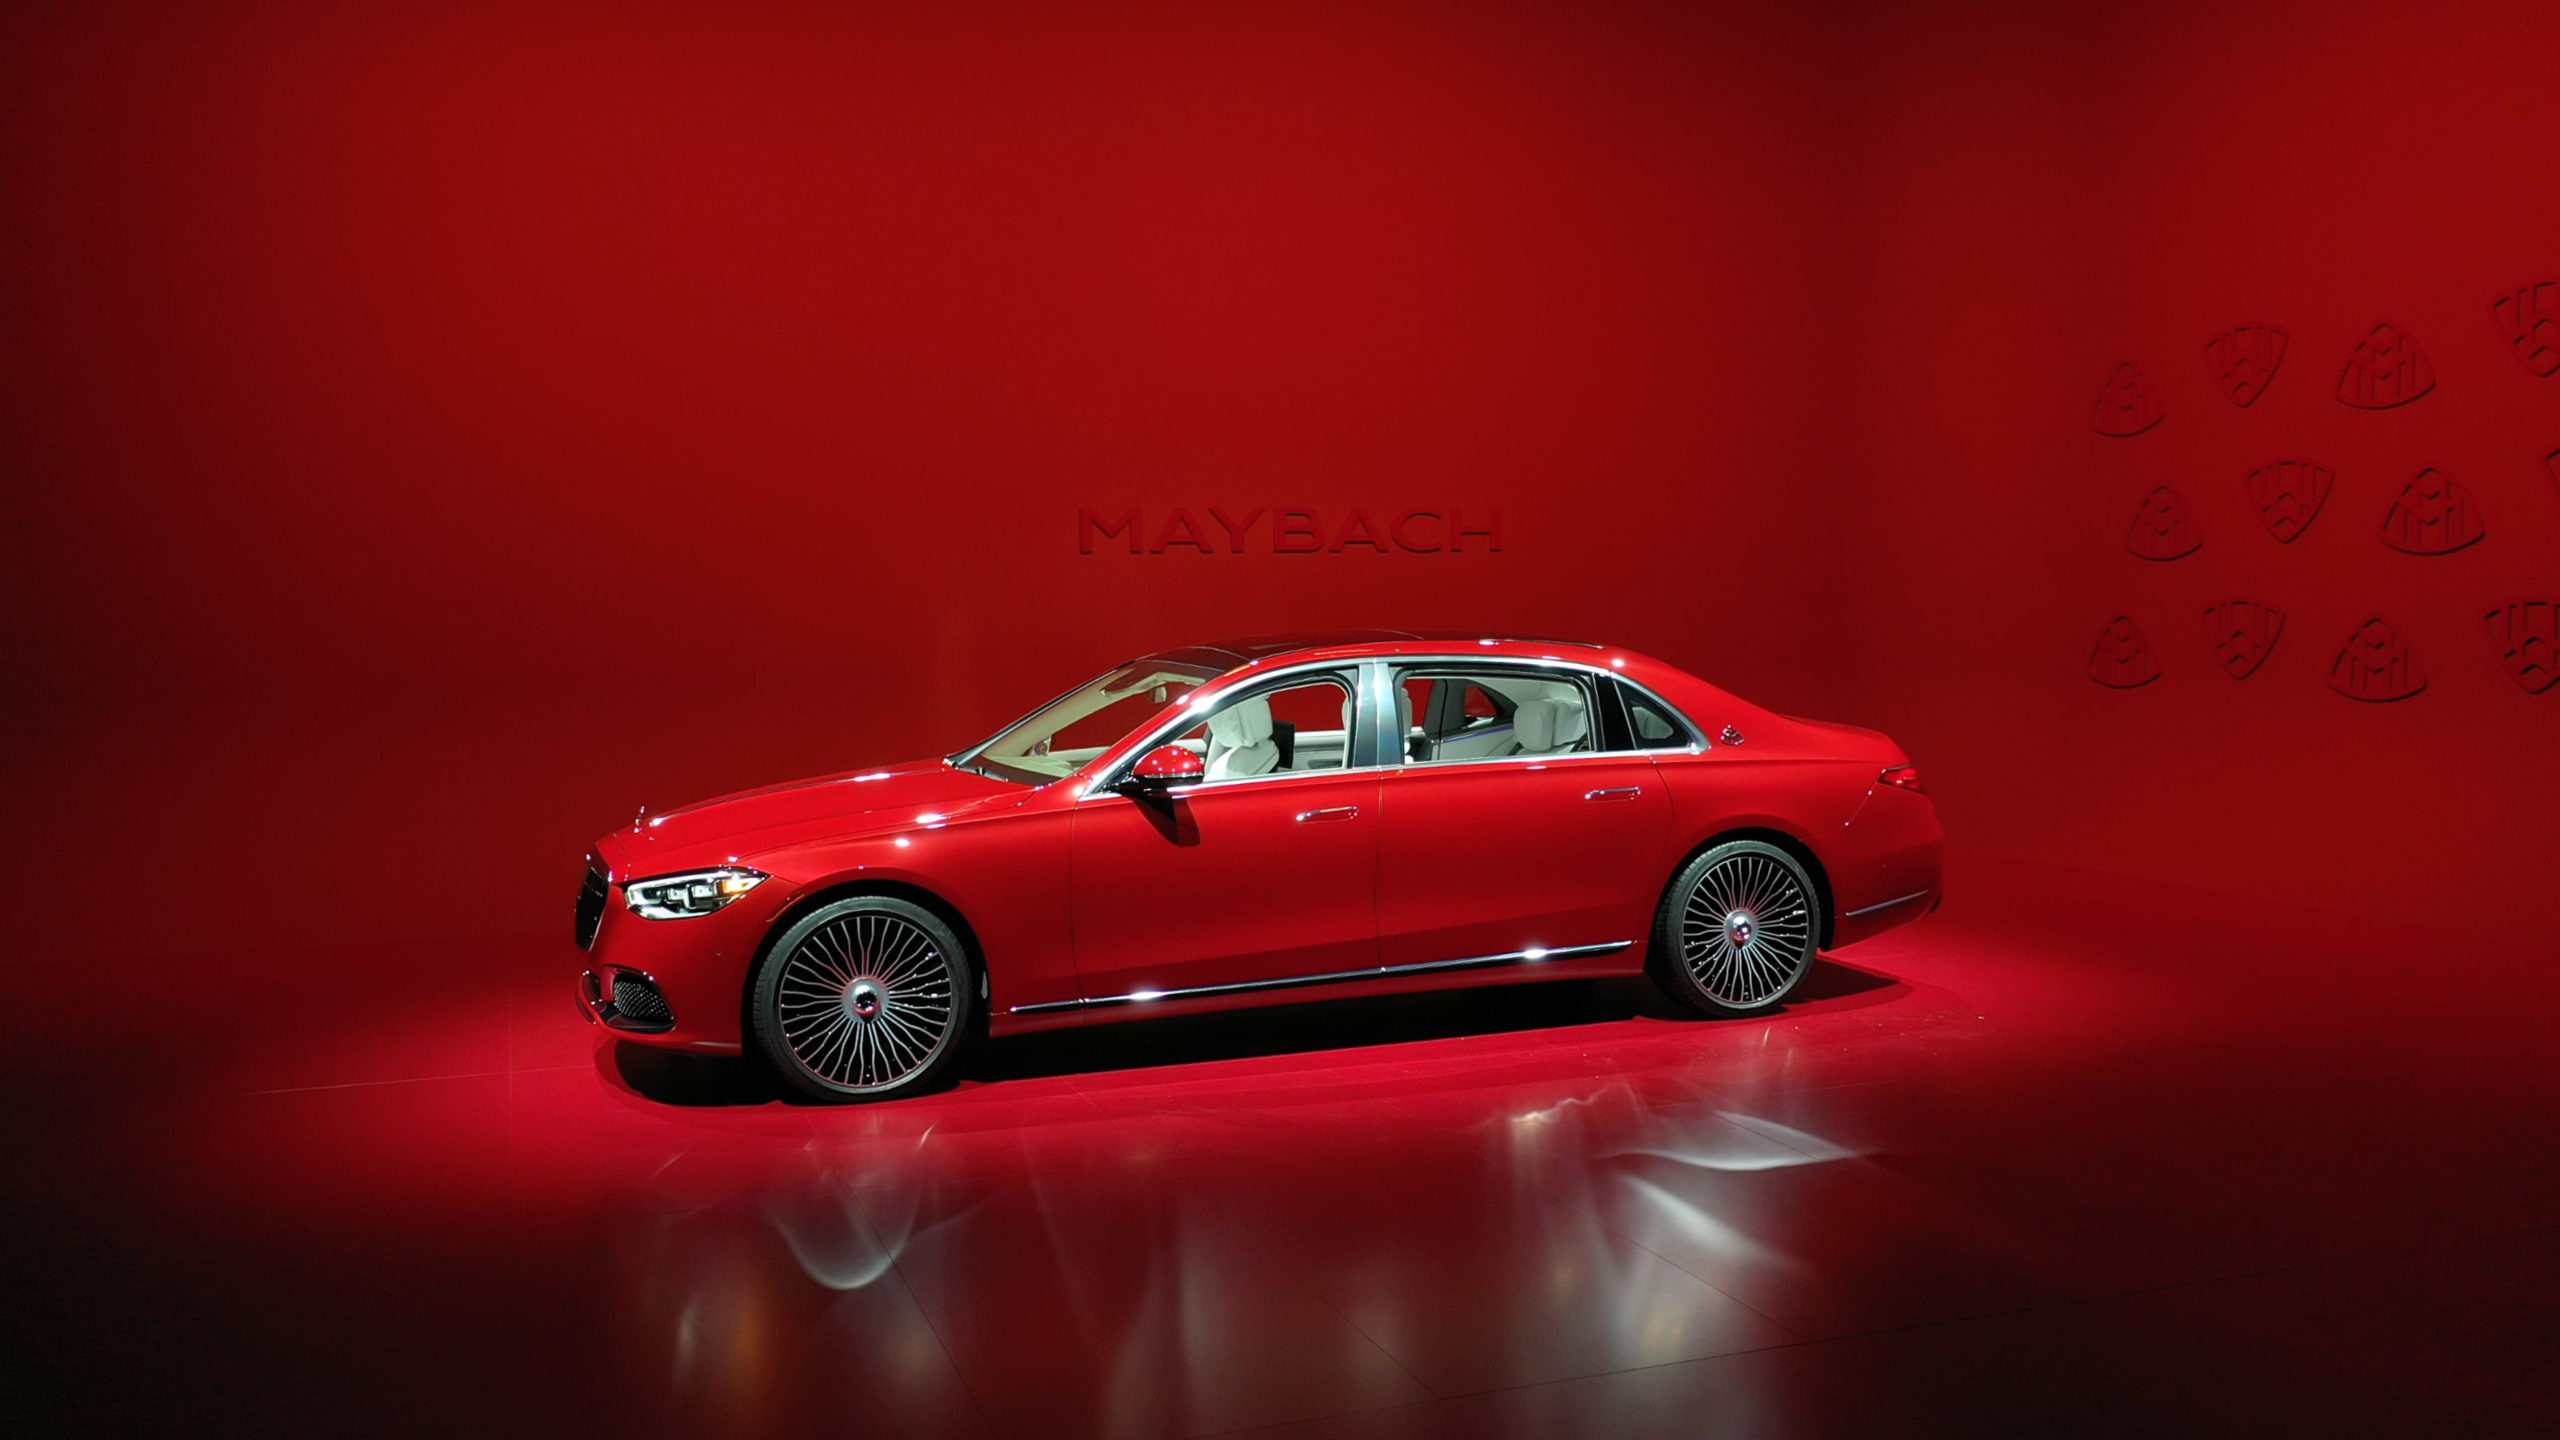 Mercedes-Maybach S-Class, Epitome of luxury, Imposing presence, Unparalleled comfort, 2560x1440 HD Desktop